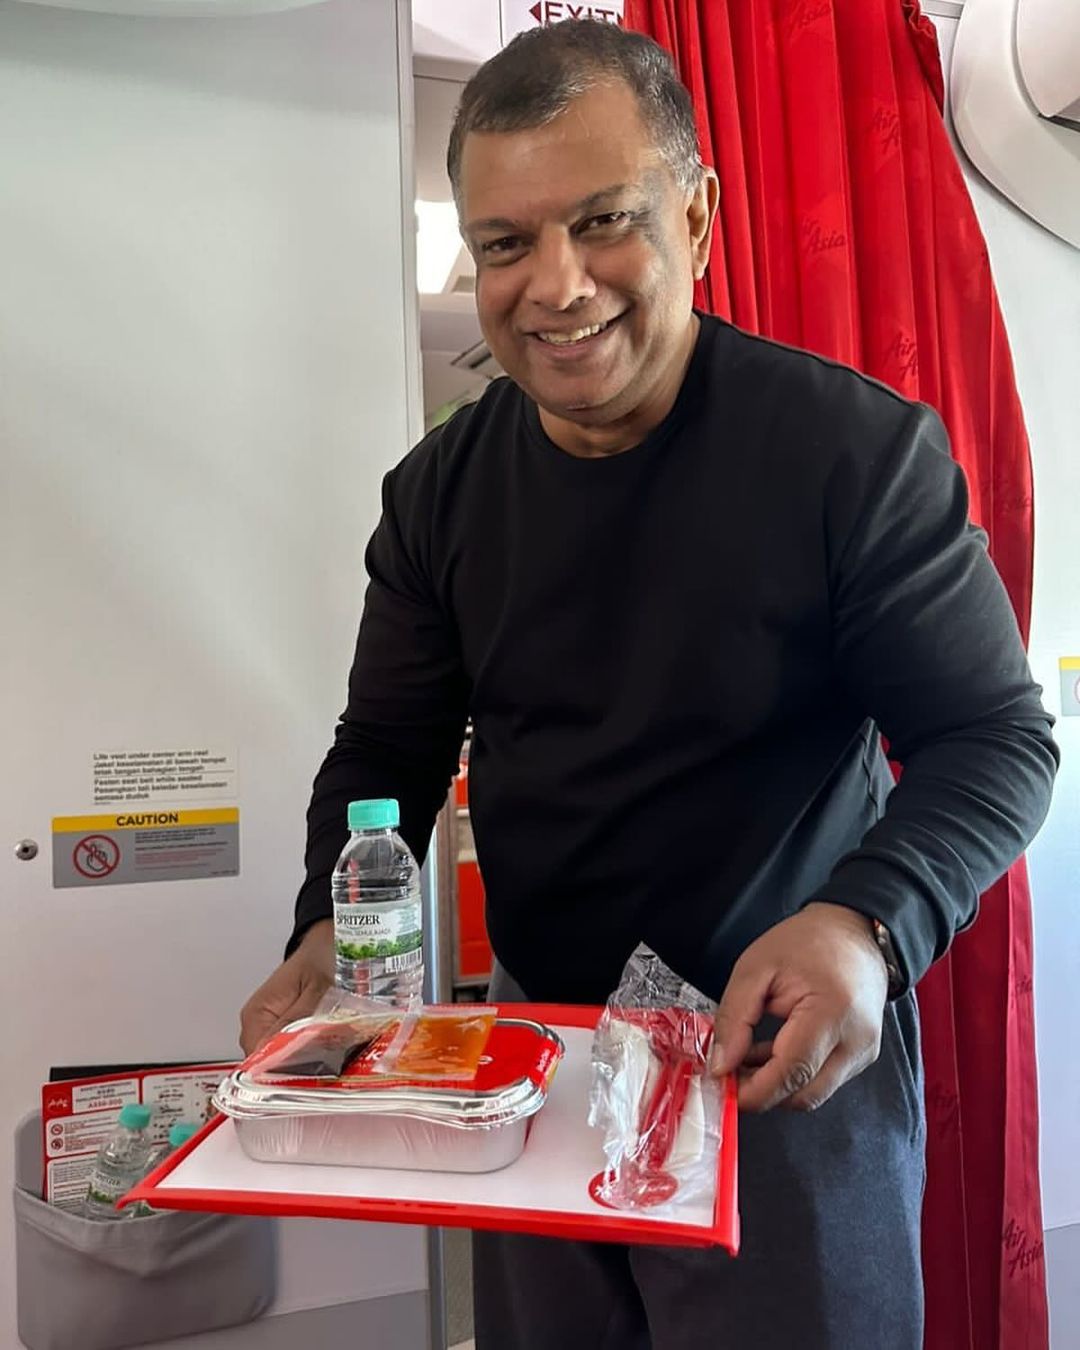 Tony fernandes poses with serving tray